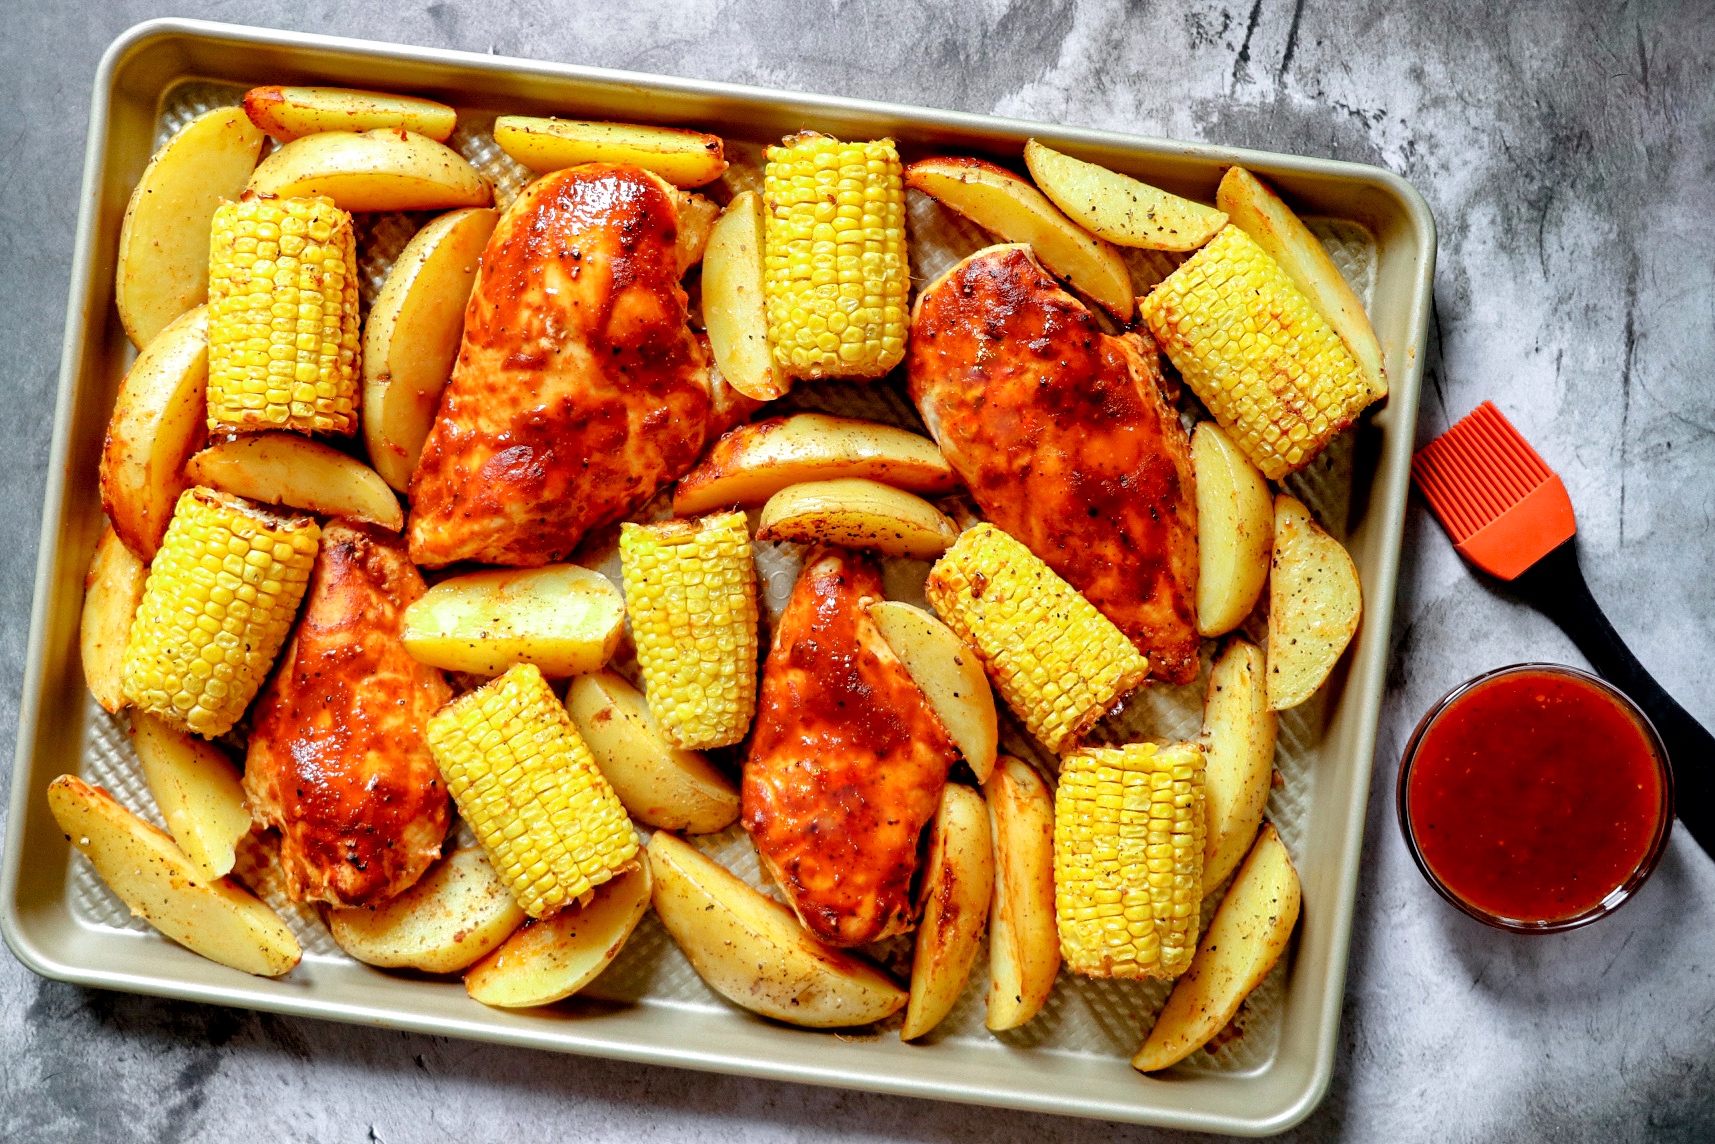 Baked BBQ Chicken Breast with Corn and Potatoes